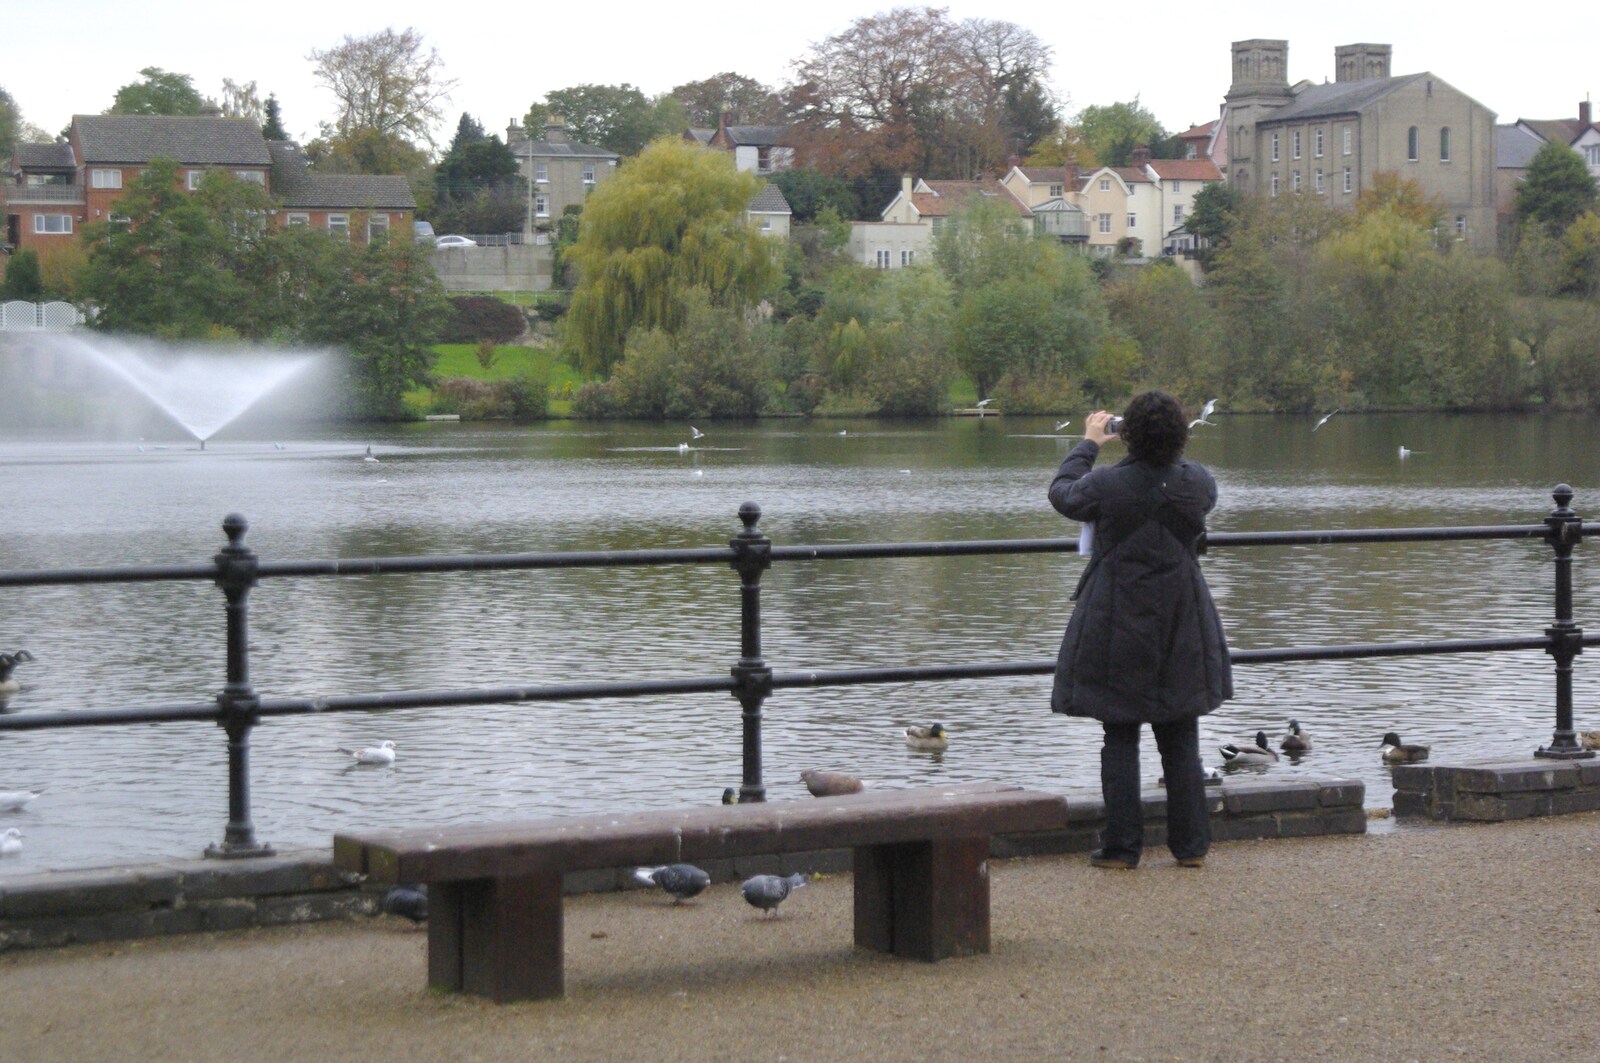 Isobel's Birthday and a Café Miscellany, Cambridge and Suffolk - 2nd November 2008: Evelyn takes some snaps of the Mere in Diss